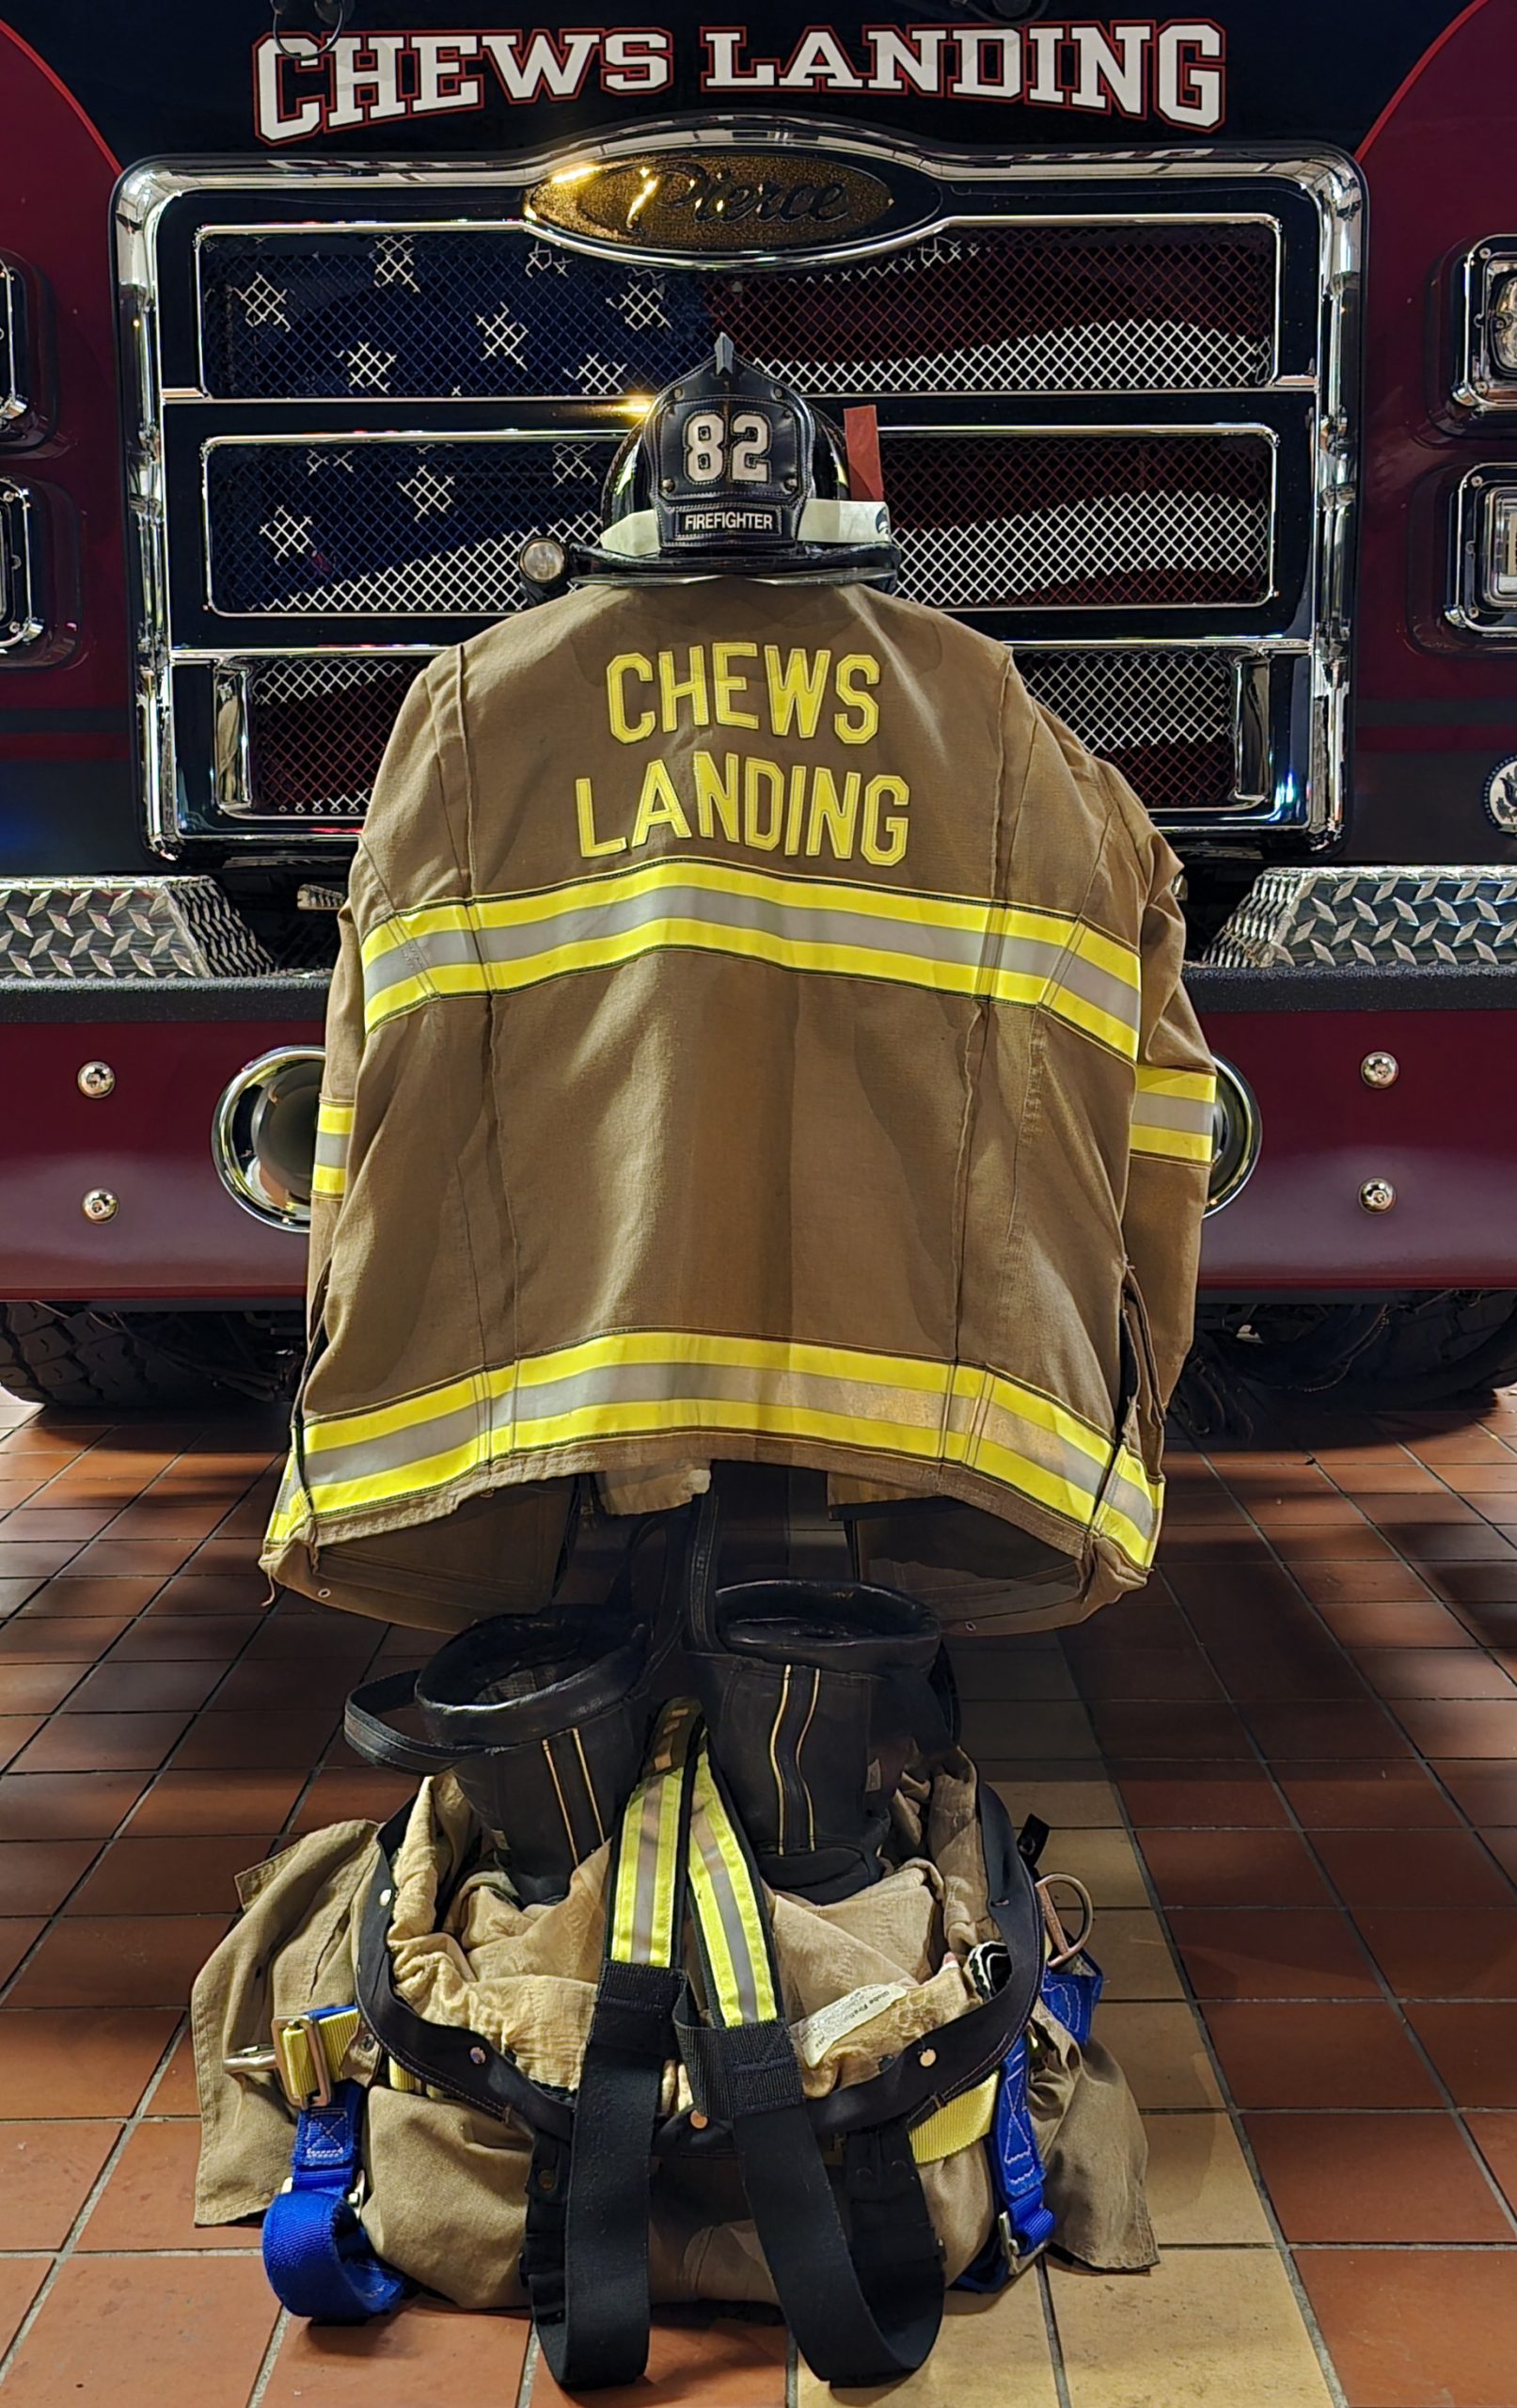 Firefighter's gear arranged in front of a fire truck with "chews landing" prominently displayed on the back of the jacket.